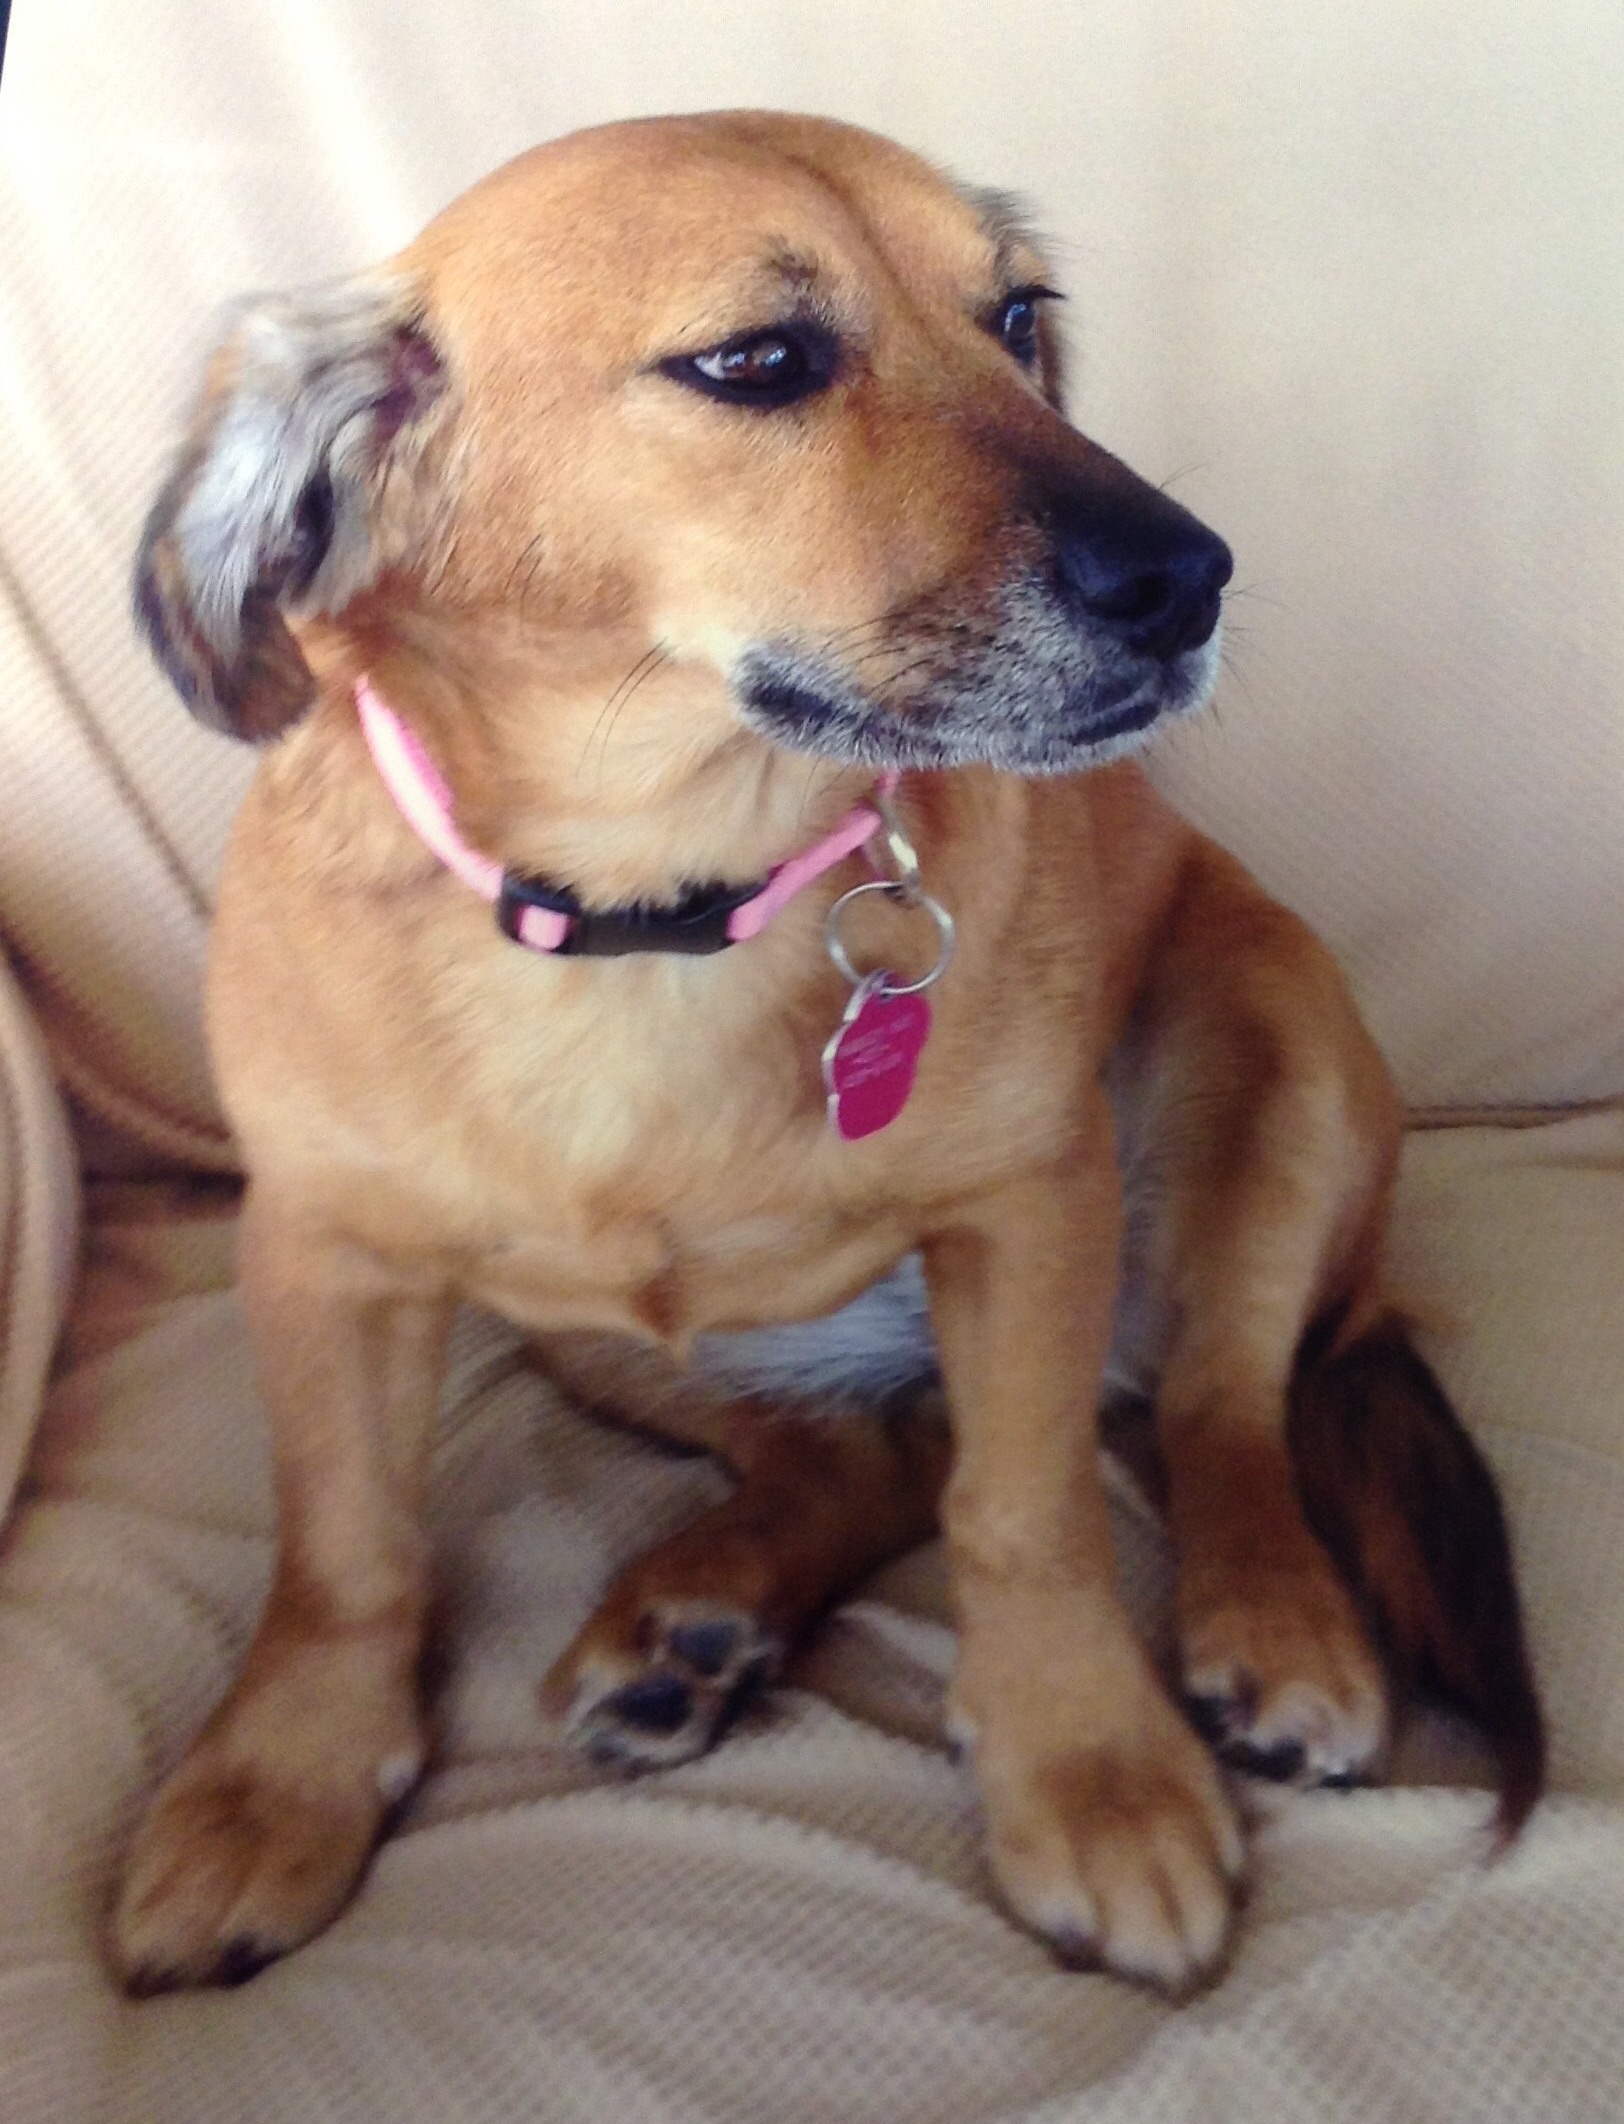 Tan dog with pink collar sitting on couch